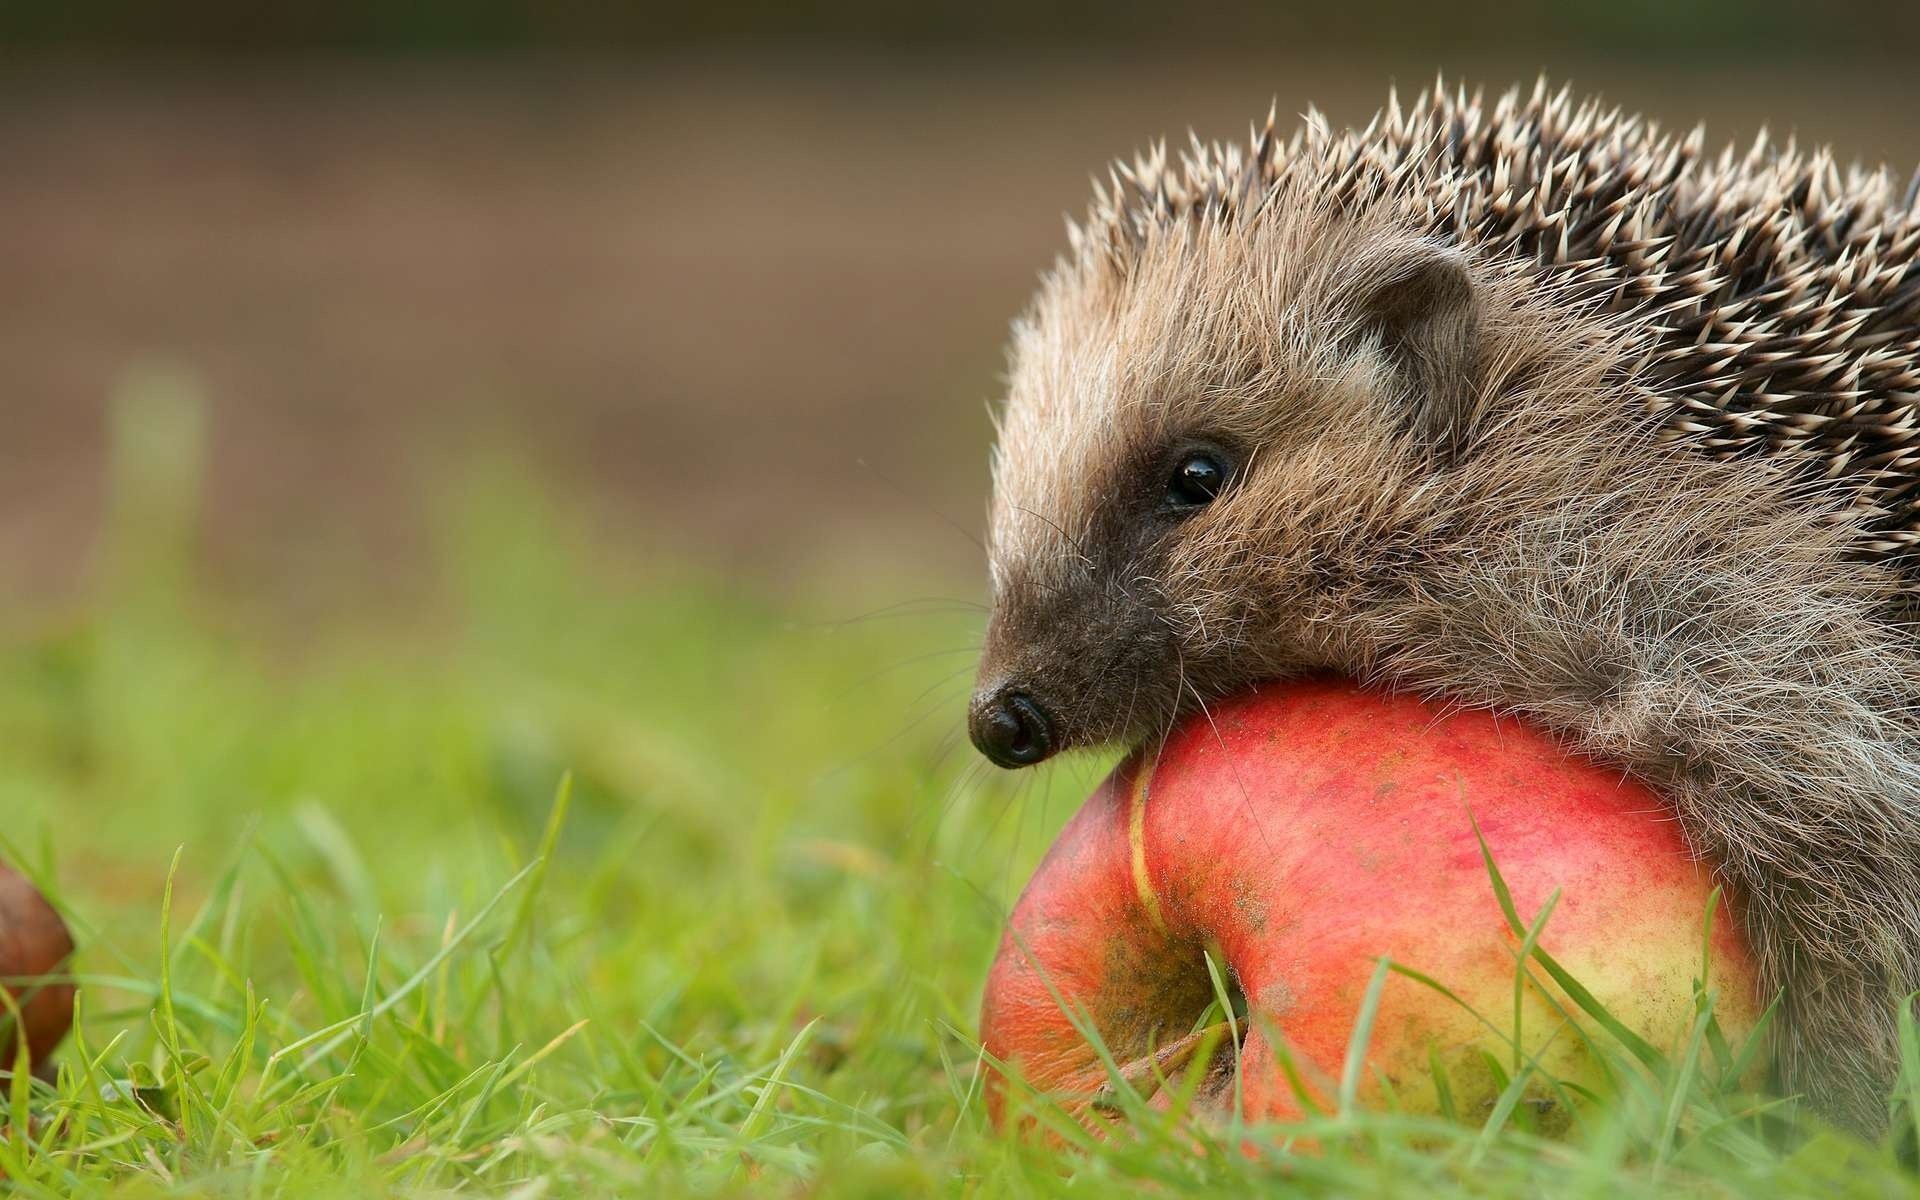 Hedgehog on an apple in the grass